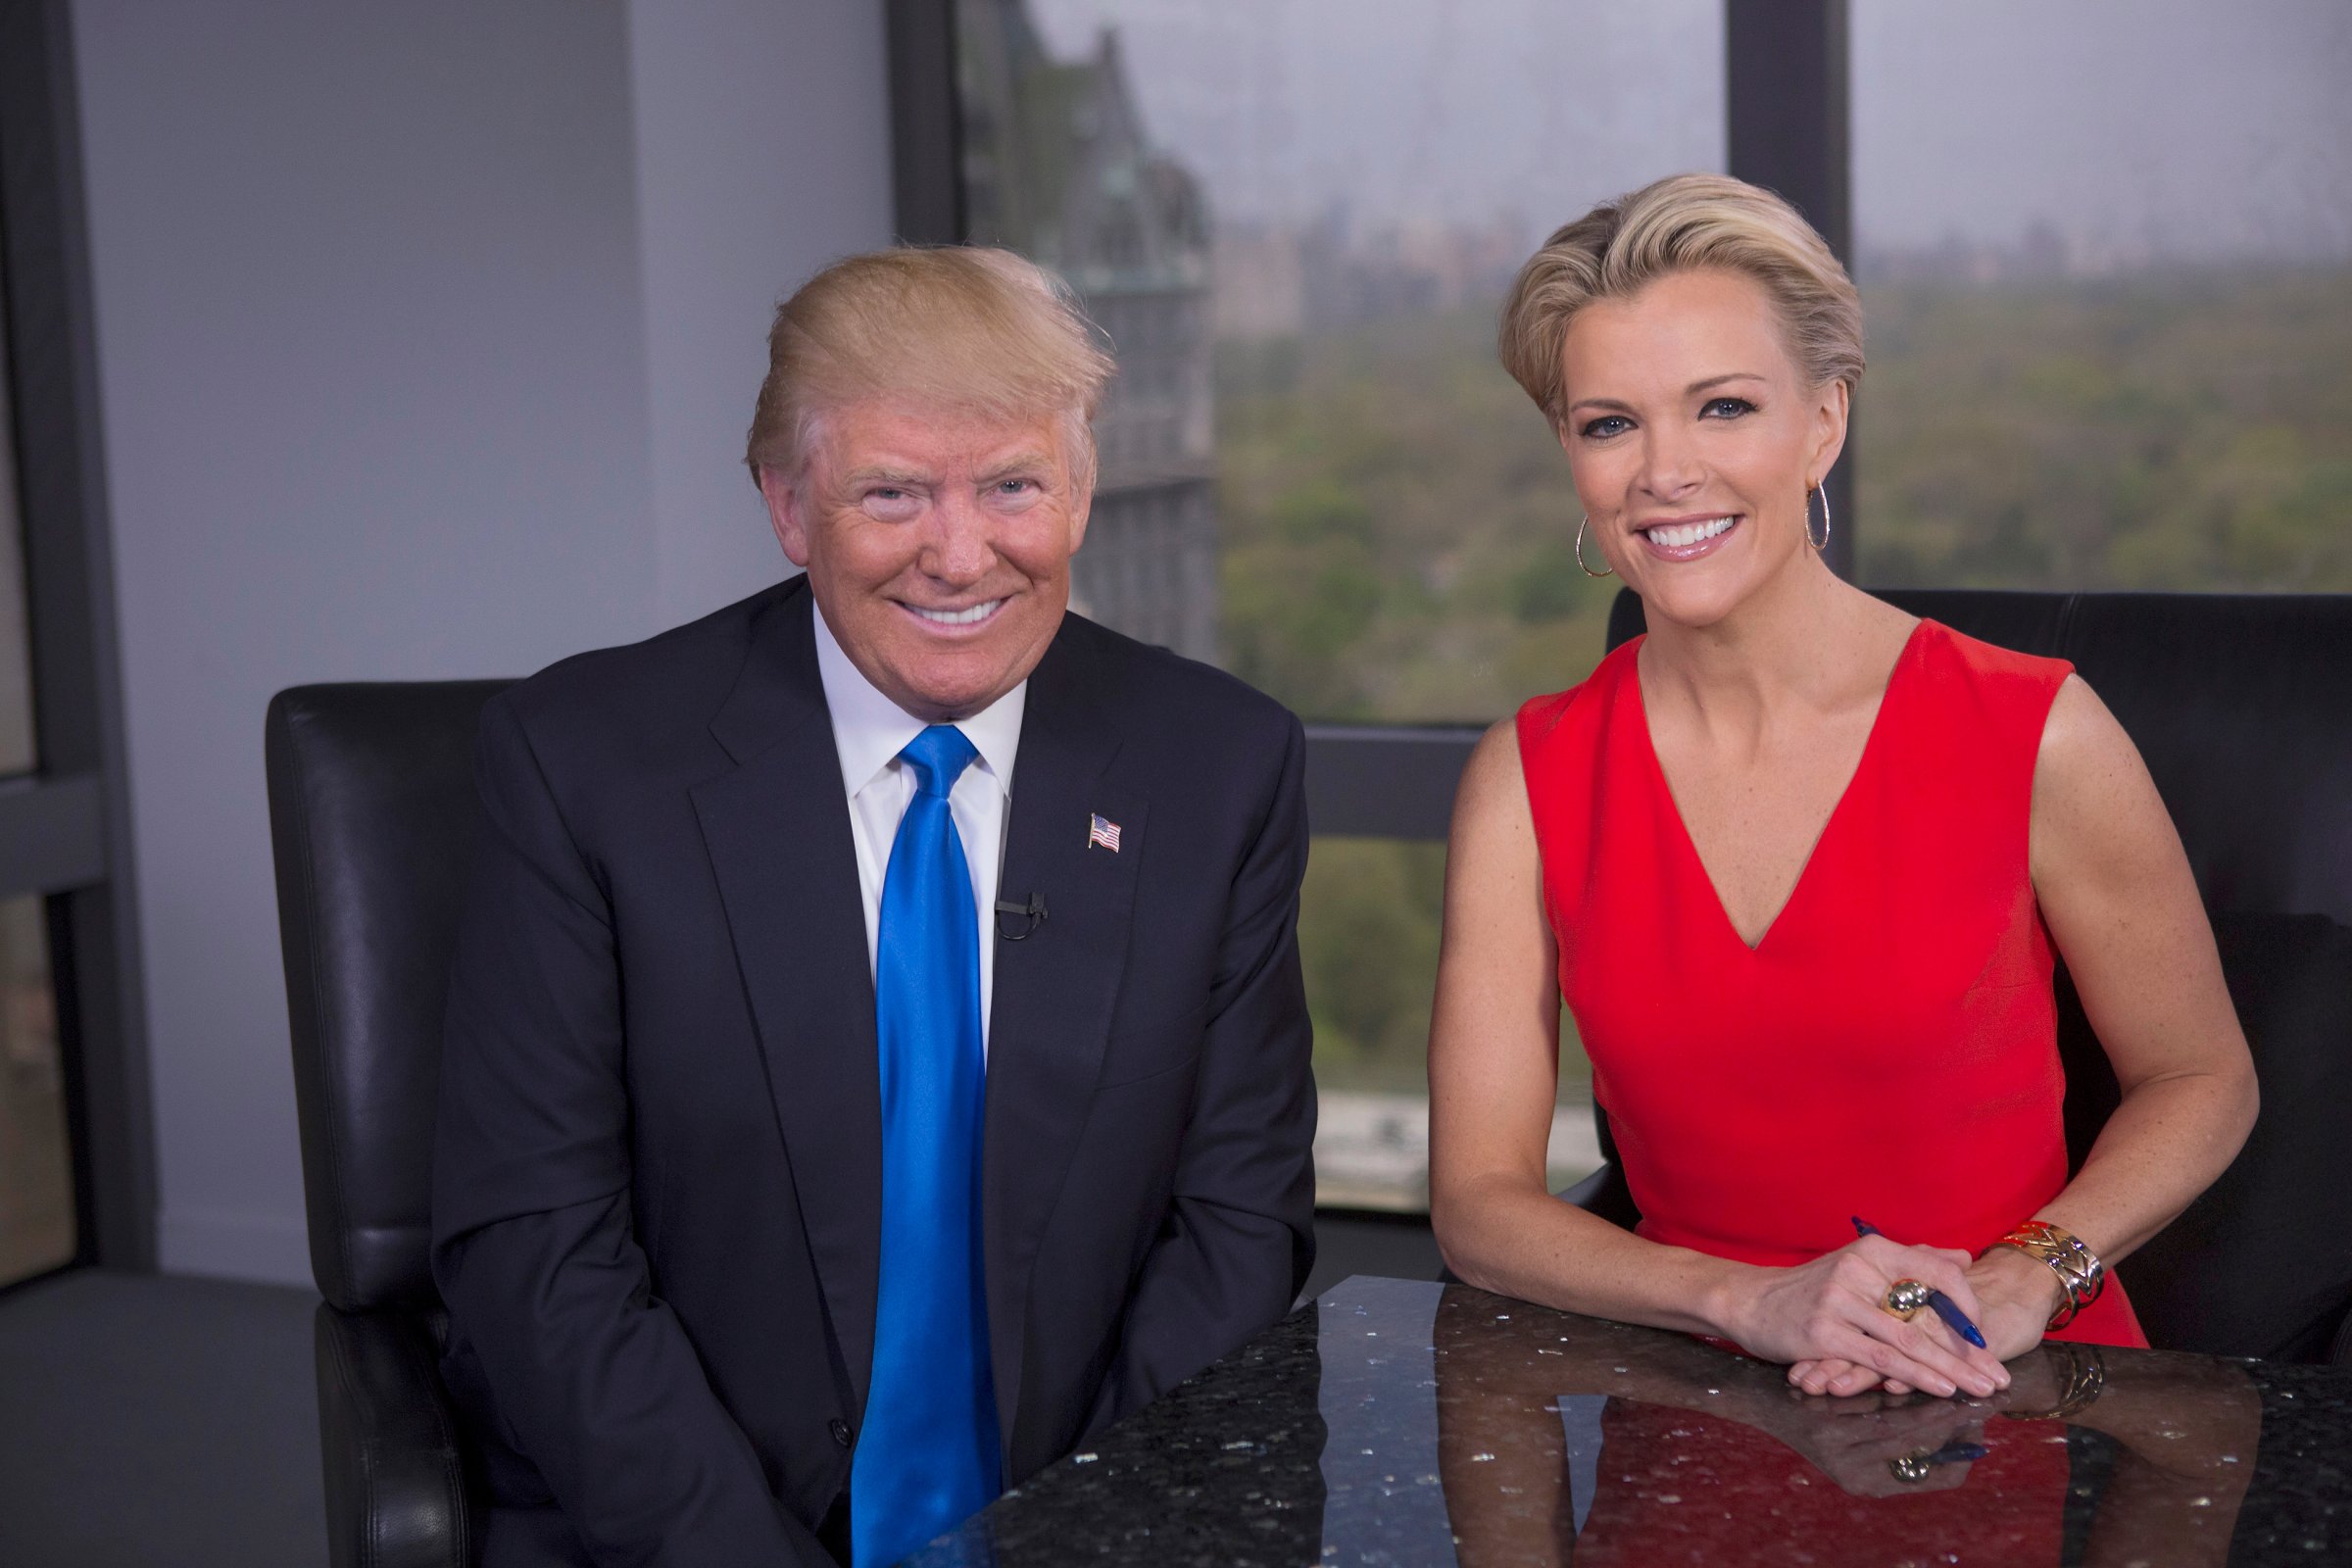 Megyn Kelly (R) and Donald Trump (L) during the FOX special "MEGYN KELLY presents" airing Tuesday, May 17 (8:00-9:01 PM ET/PT) on FOX.